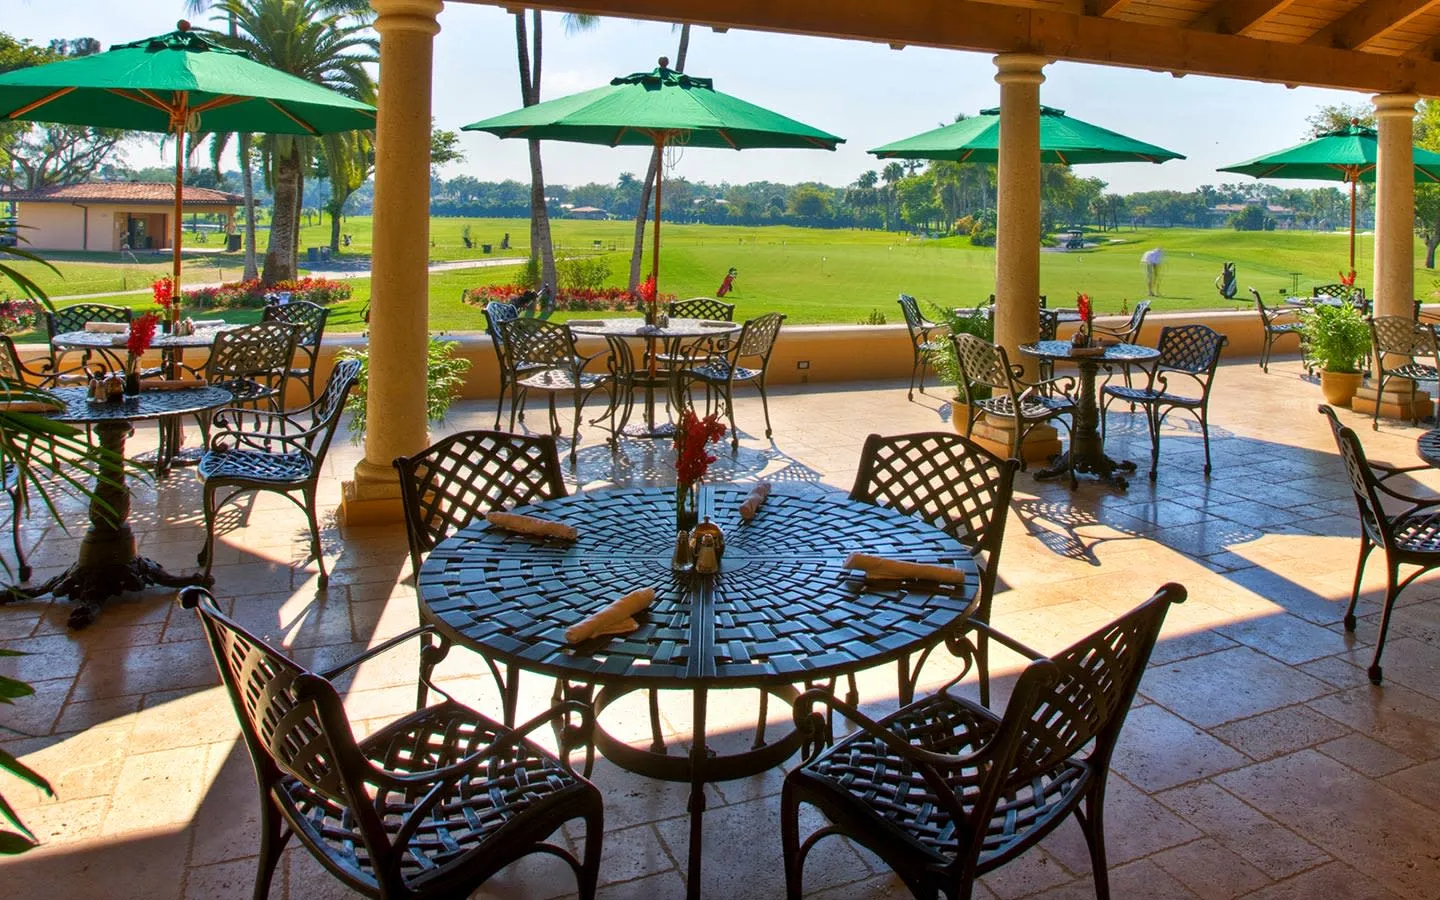 Dine by the golf course